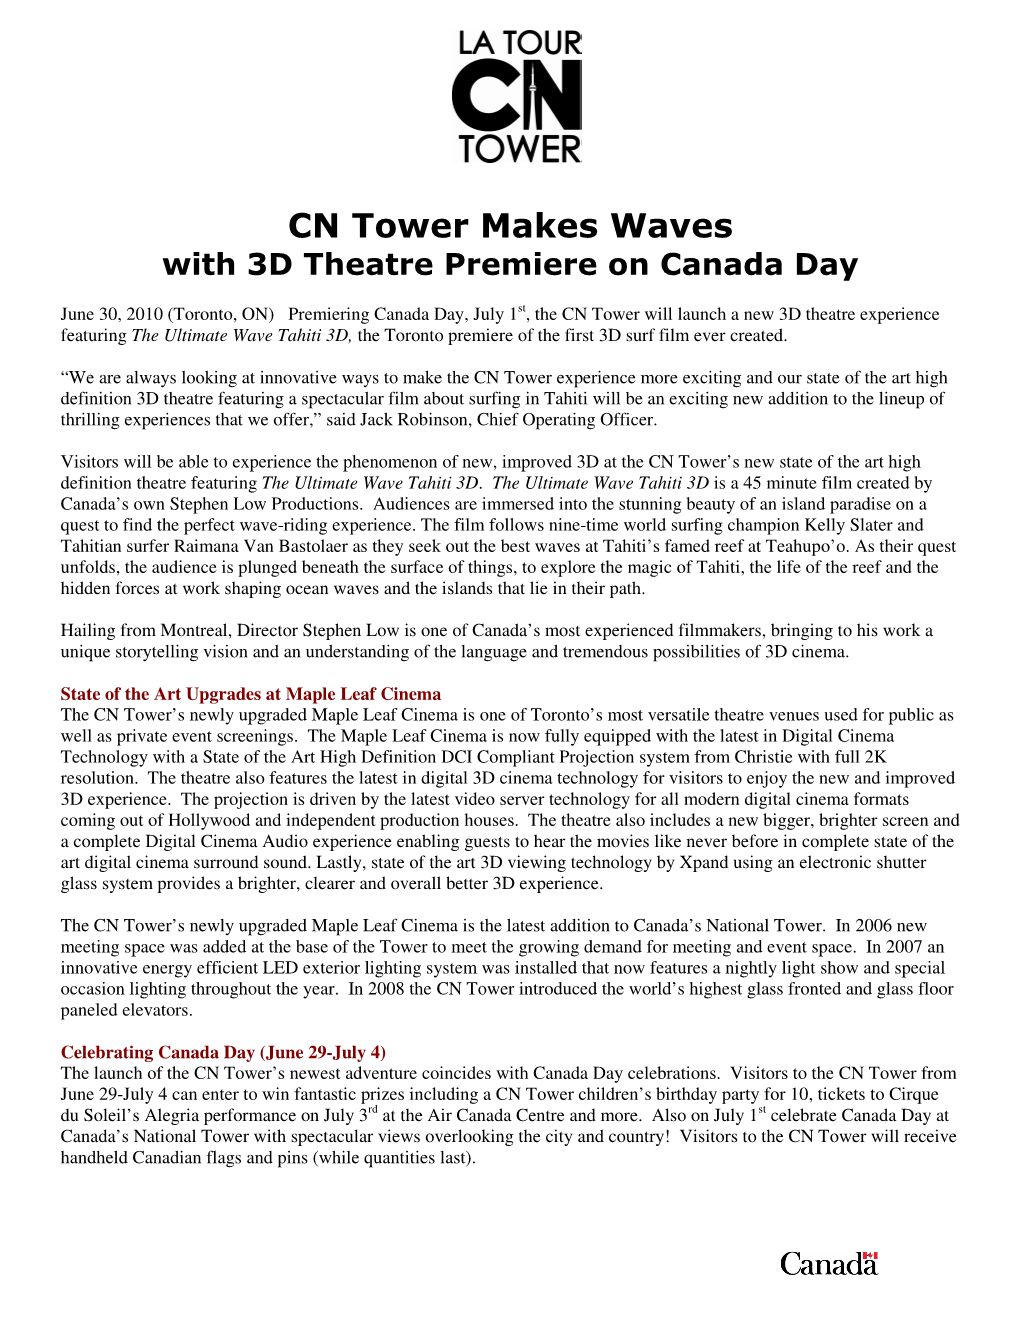 CN Tower Makes Waves with 3D Theatre Premiere on Canada Day